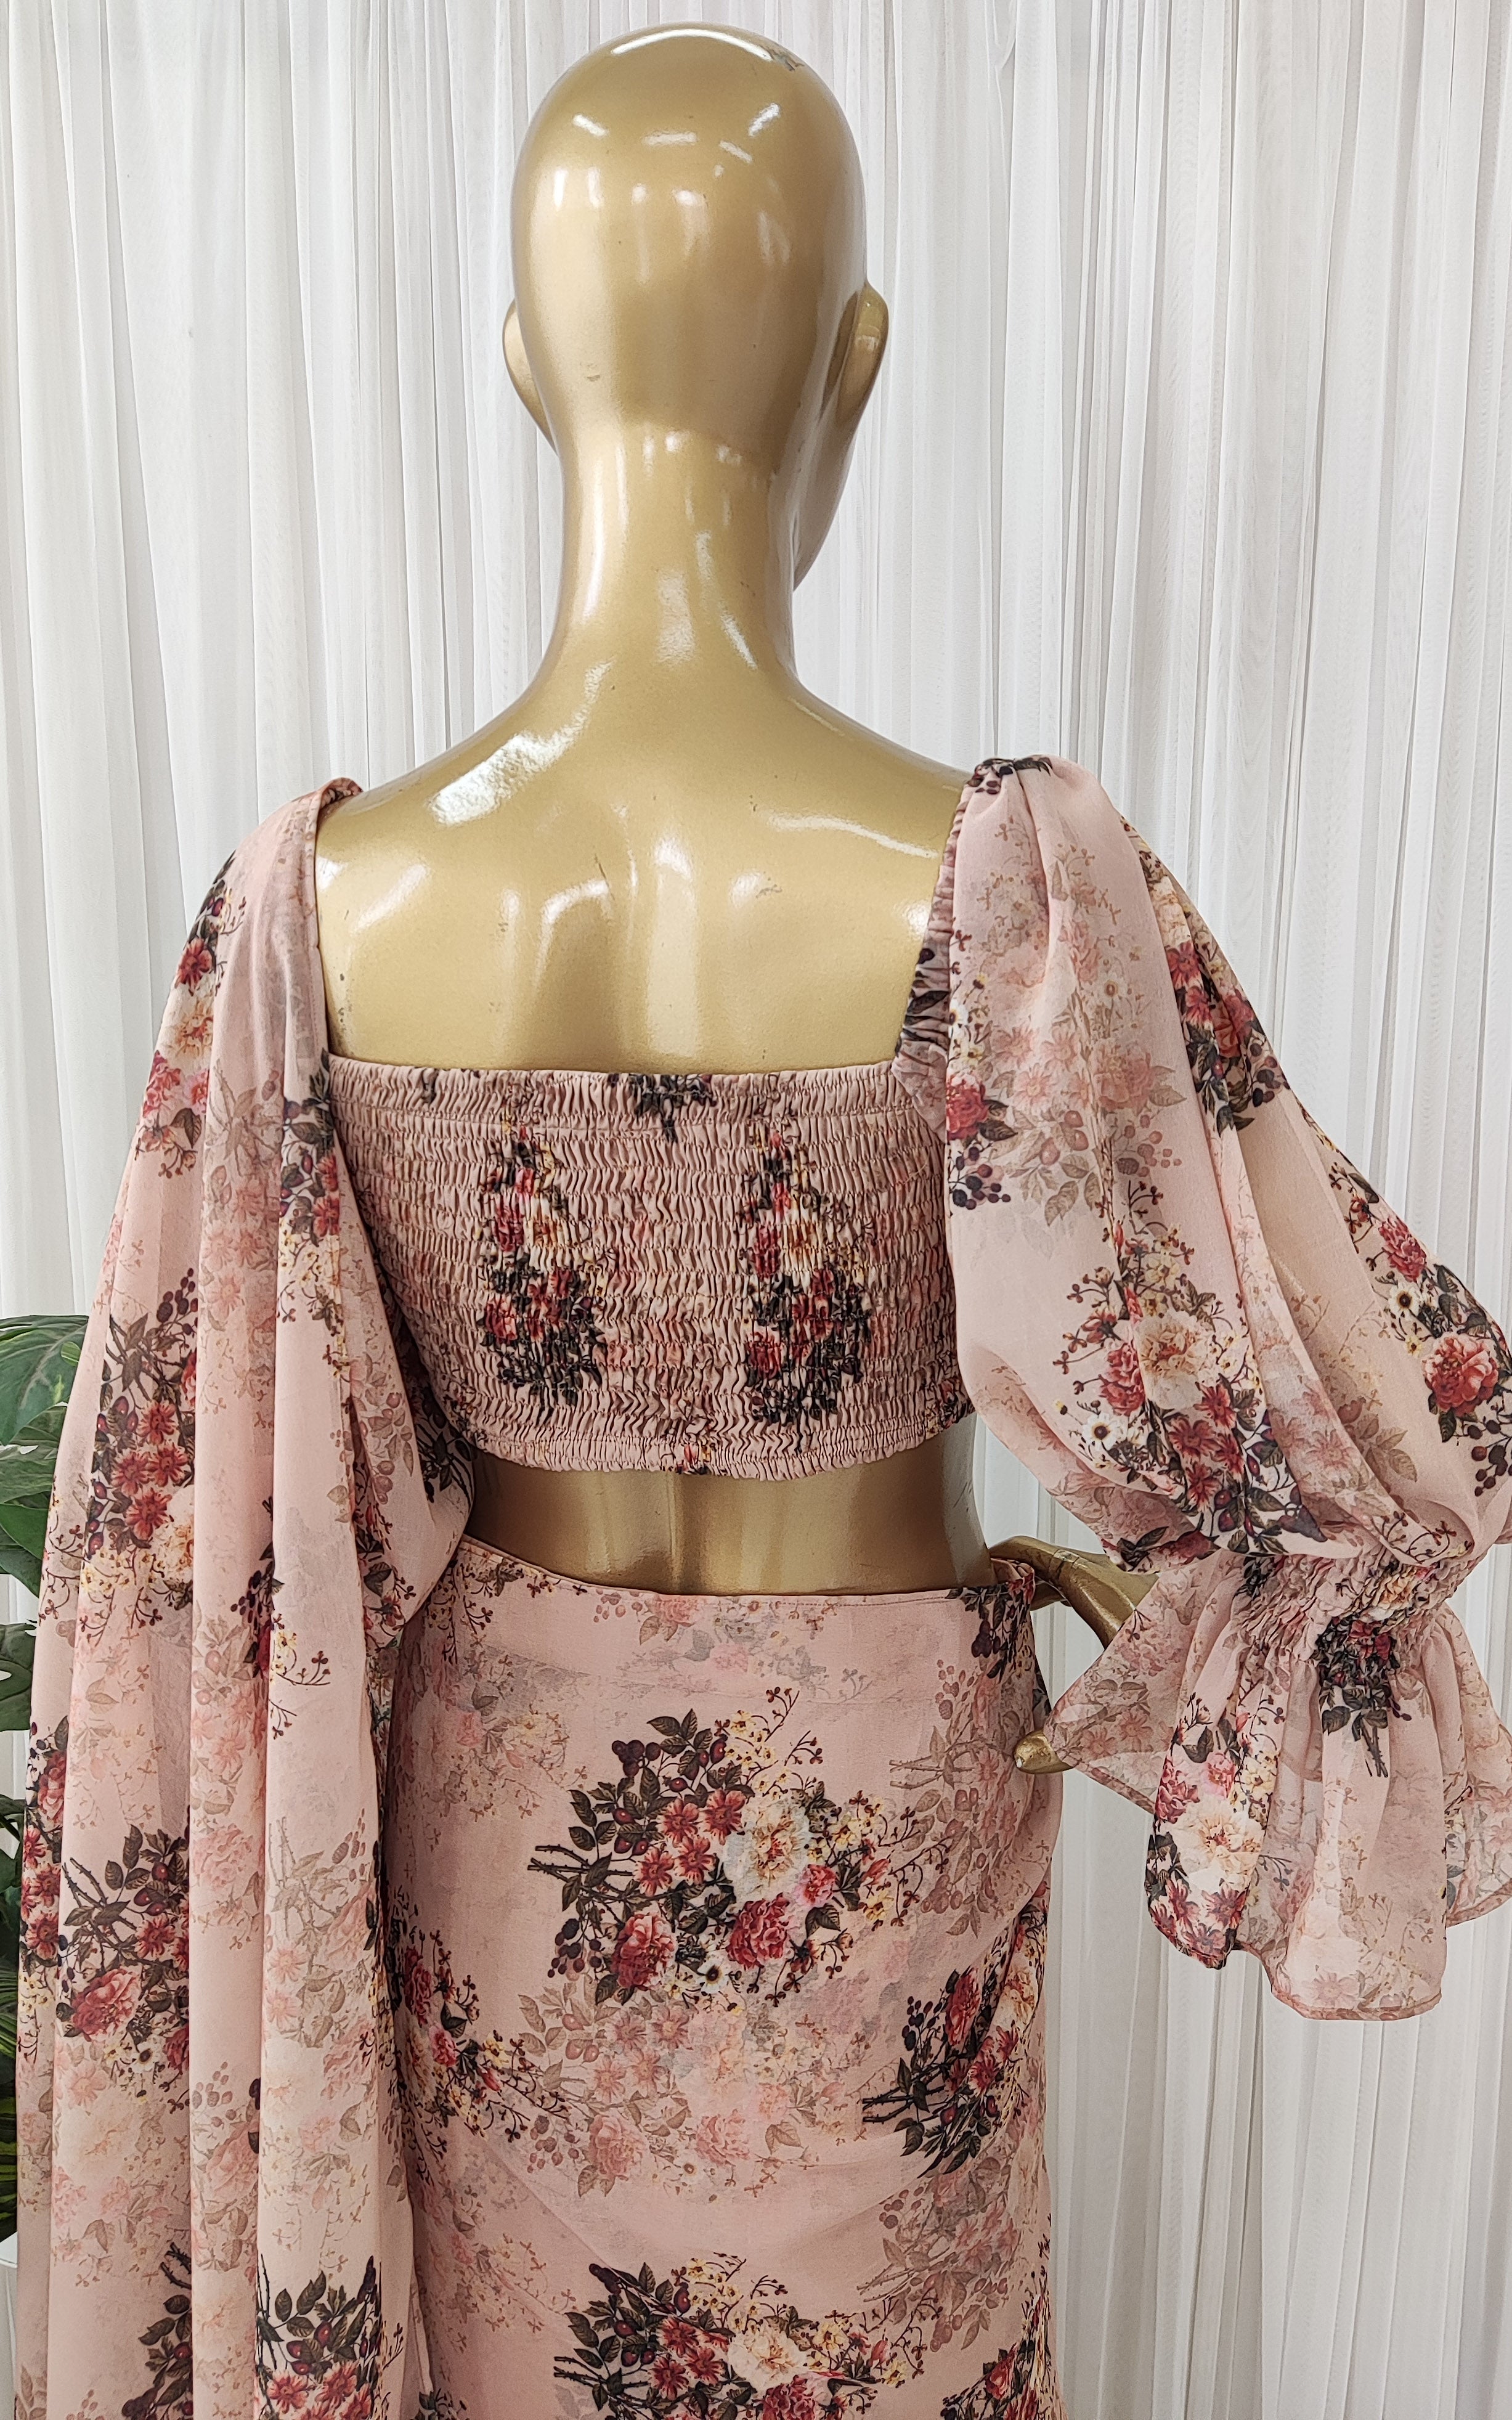 Sepia Floral Pre-Stitched Saree with Smocked Crop Top